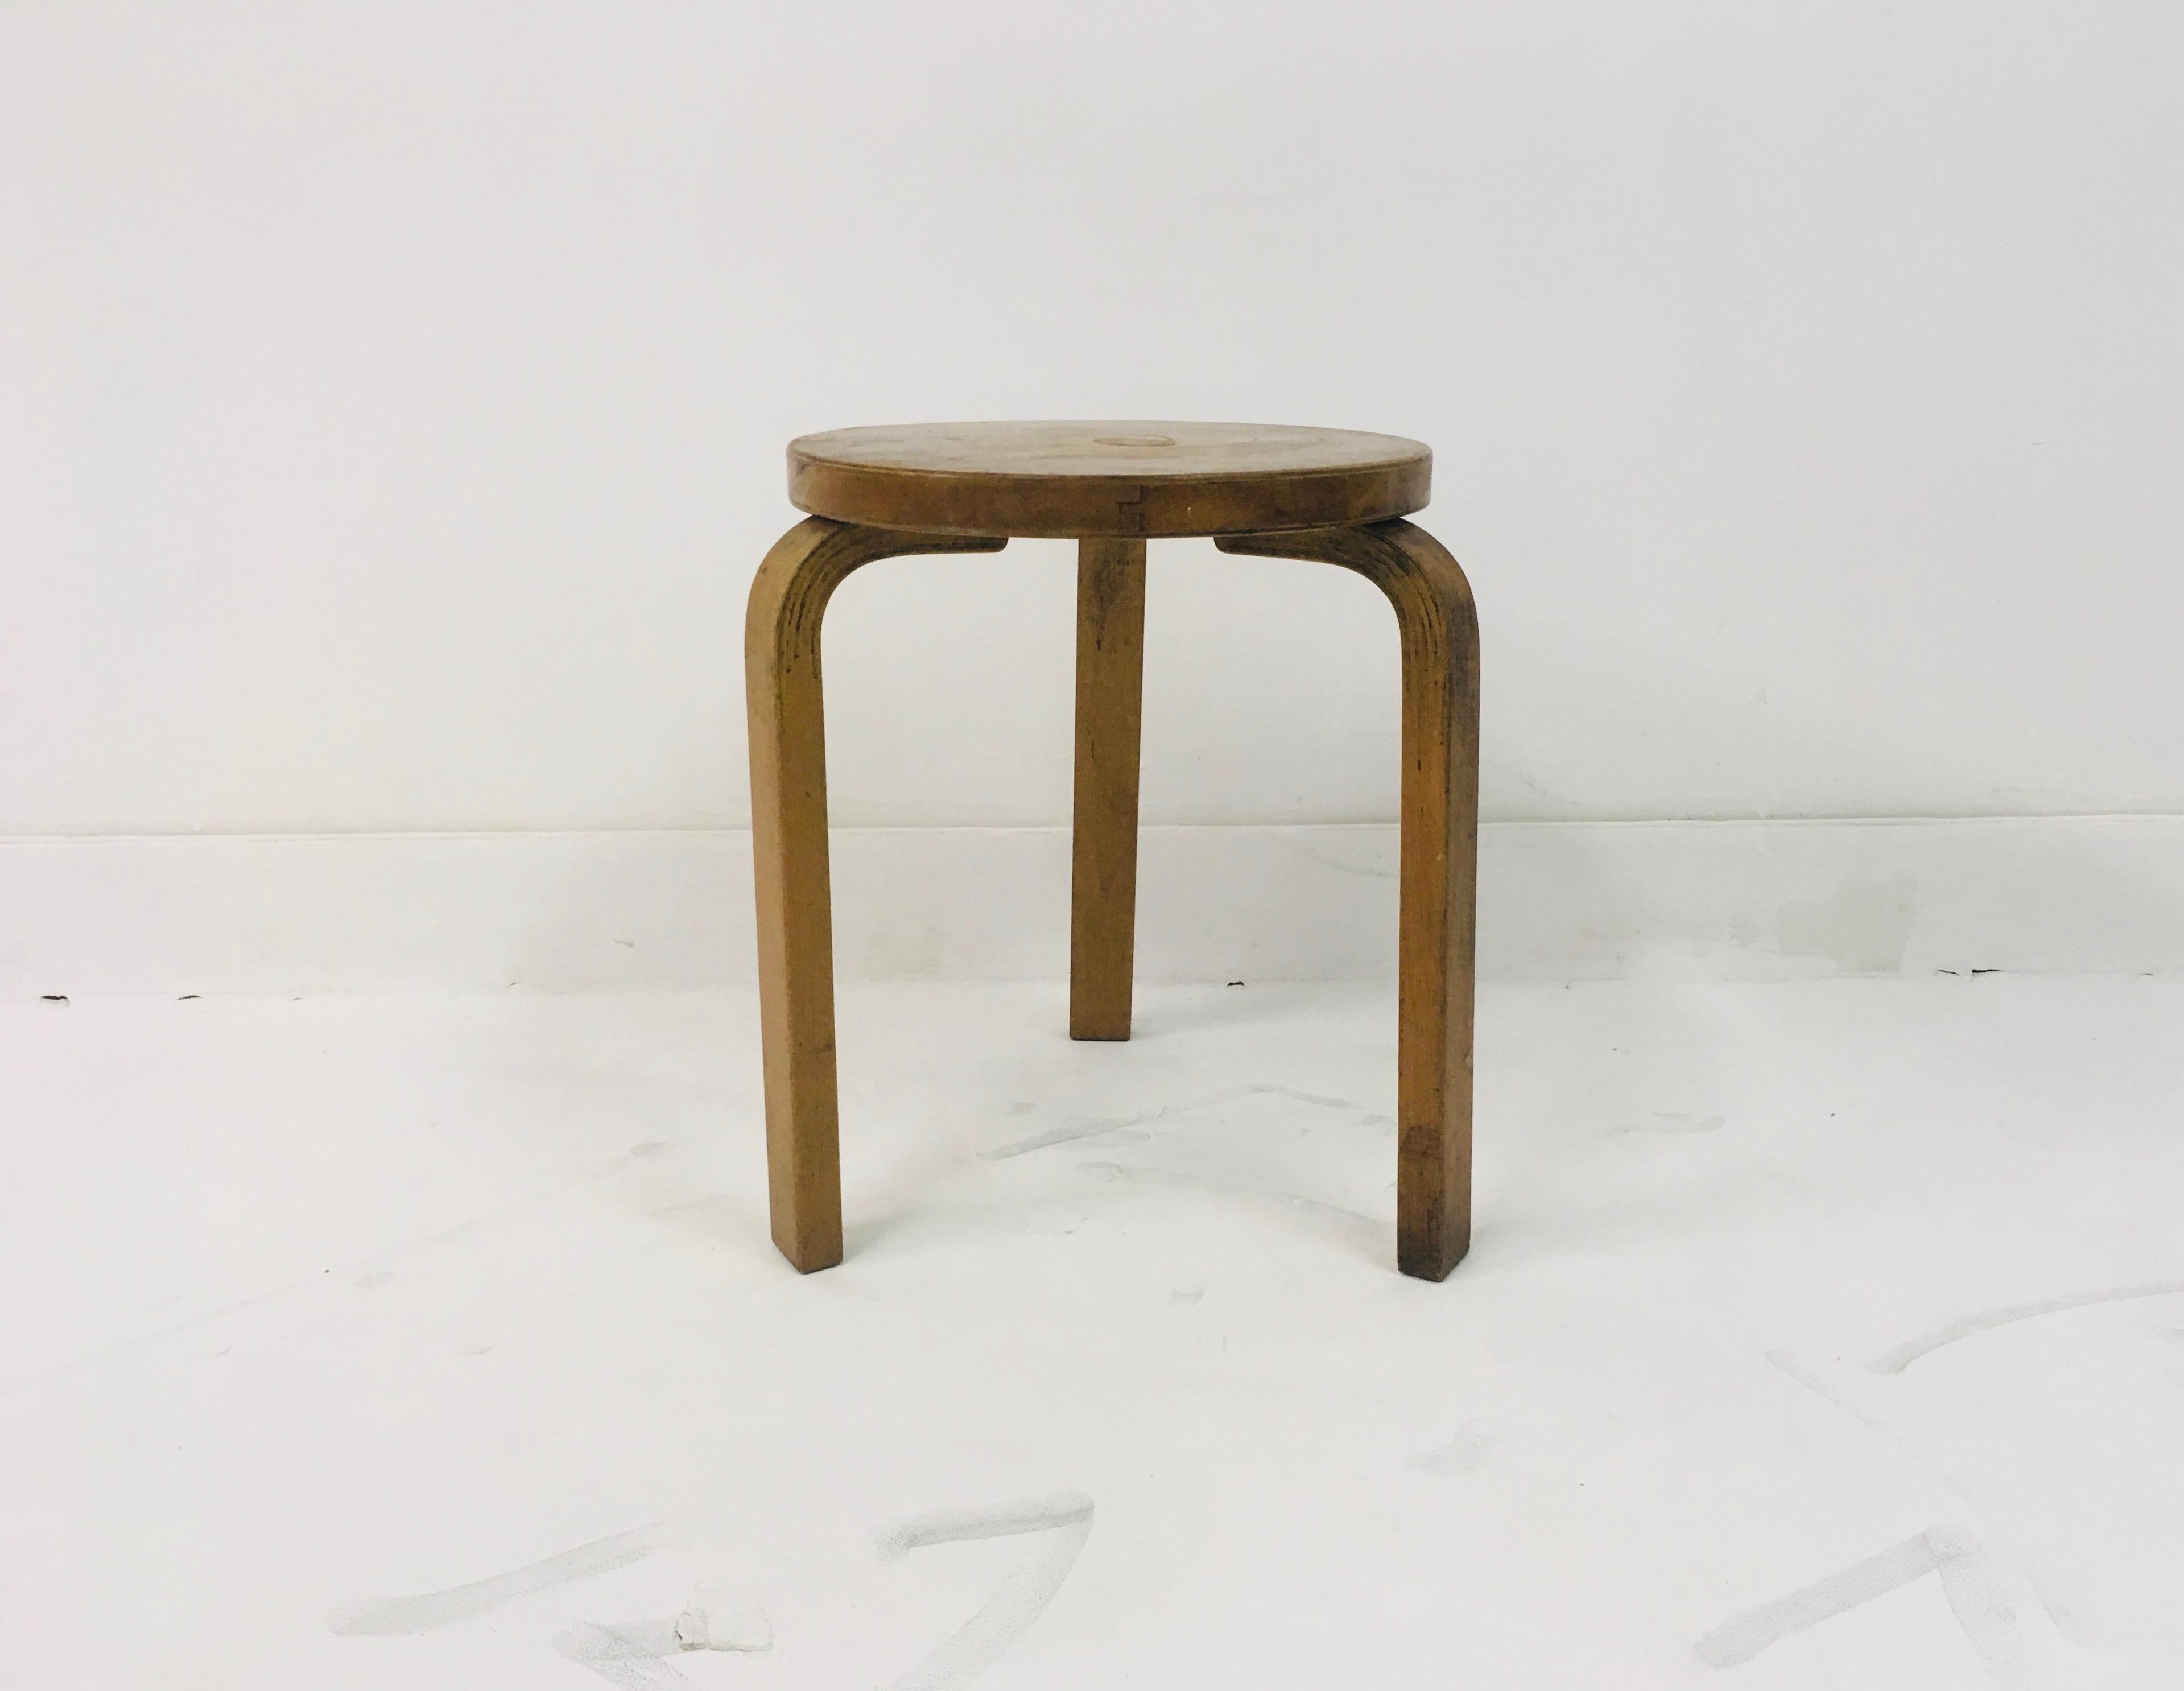 Model 60 stool

By Alvar Aalto for Artek

Distributed in London by Finmar

Birch

Seat is 35cm diameter

(Up until recently) labelled with Finmar tag

1930s, Finland.